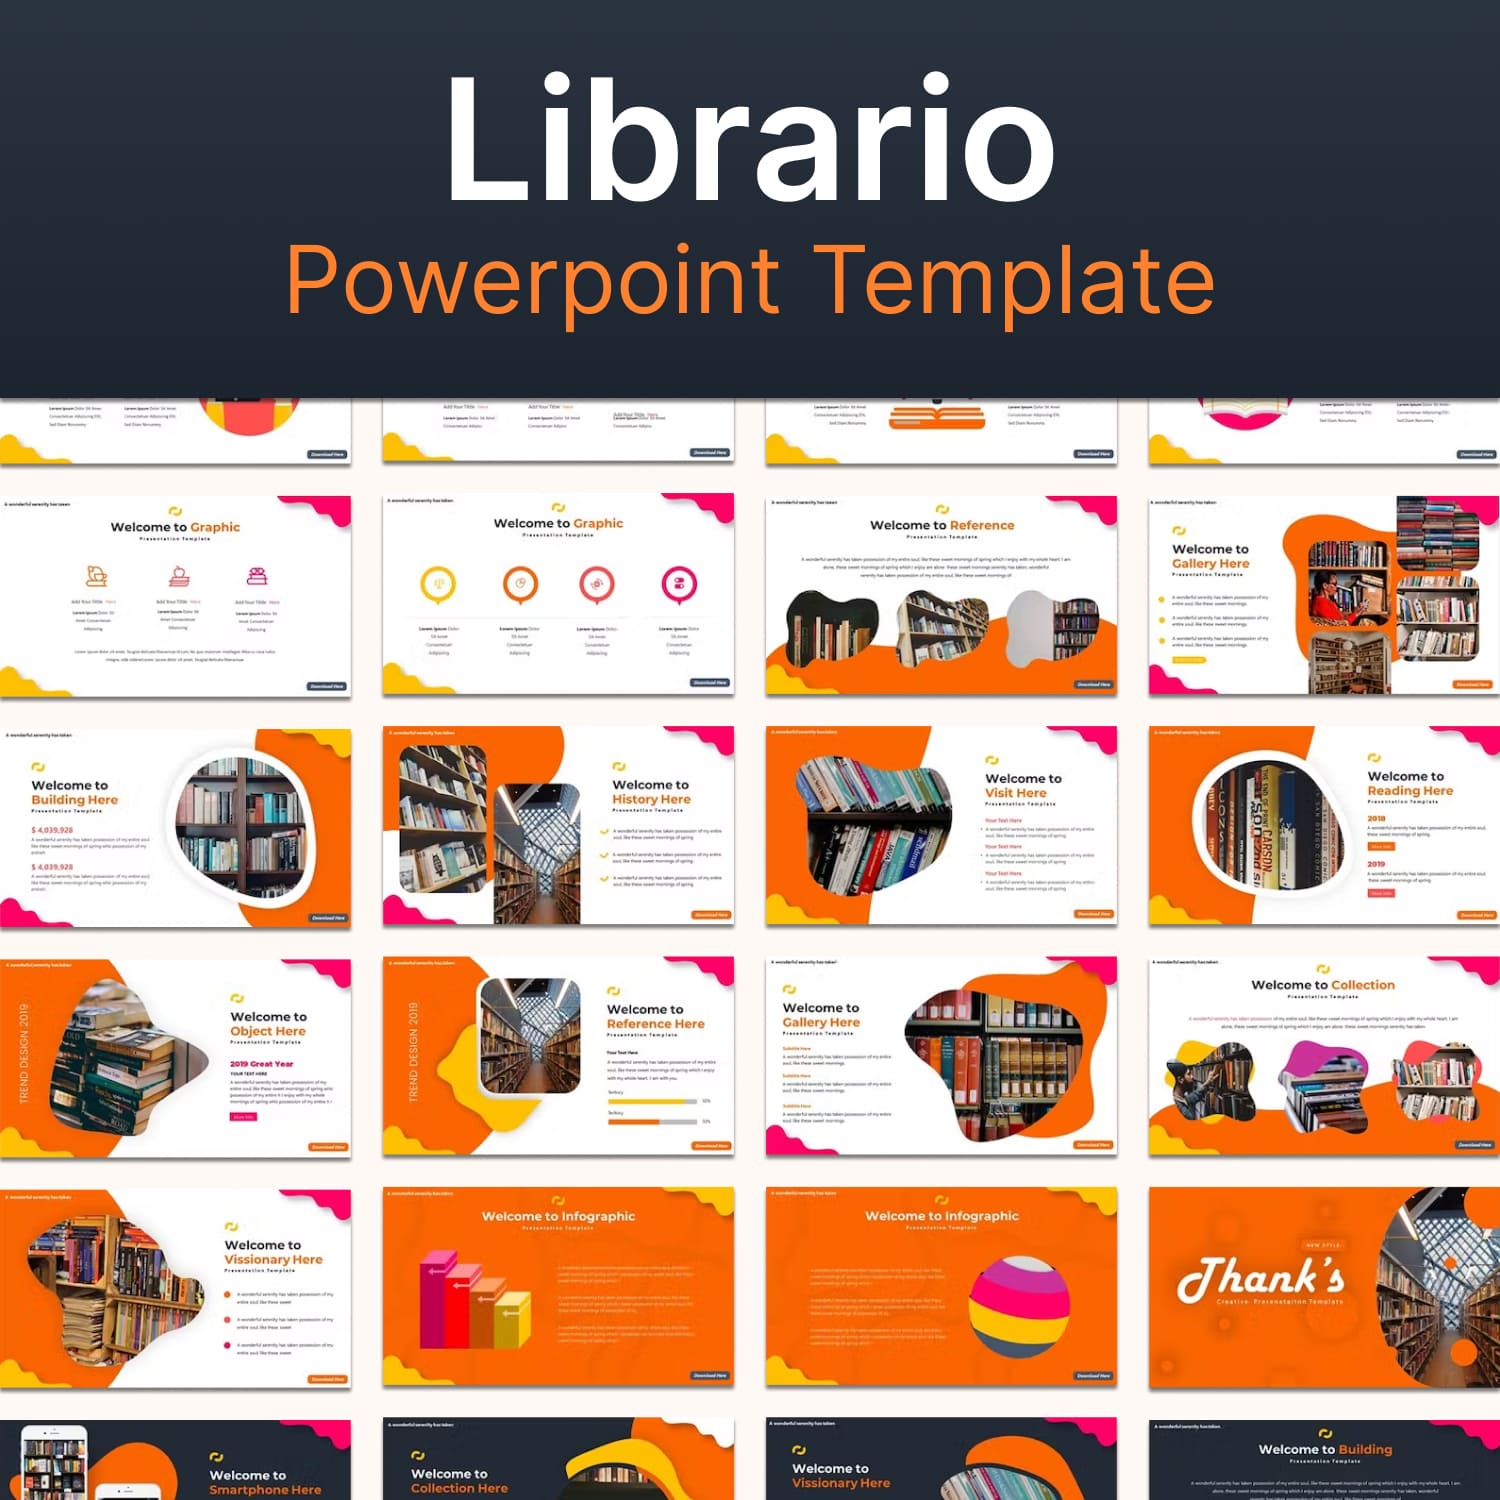 Librario powerpoint template - main image preview.